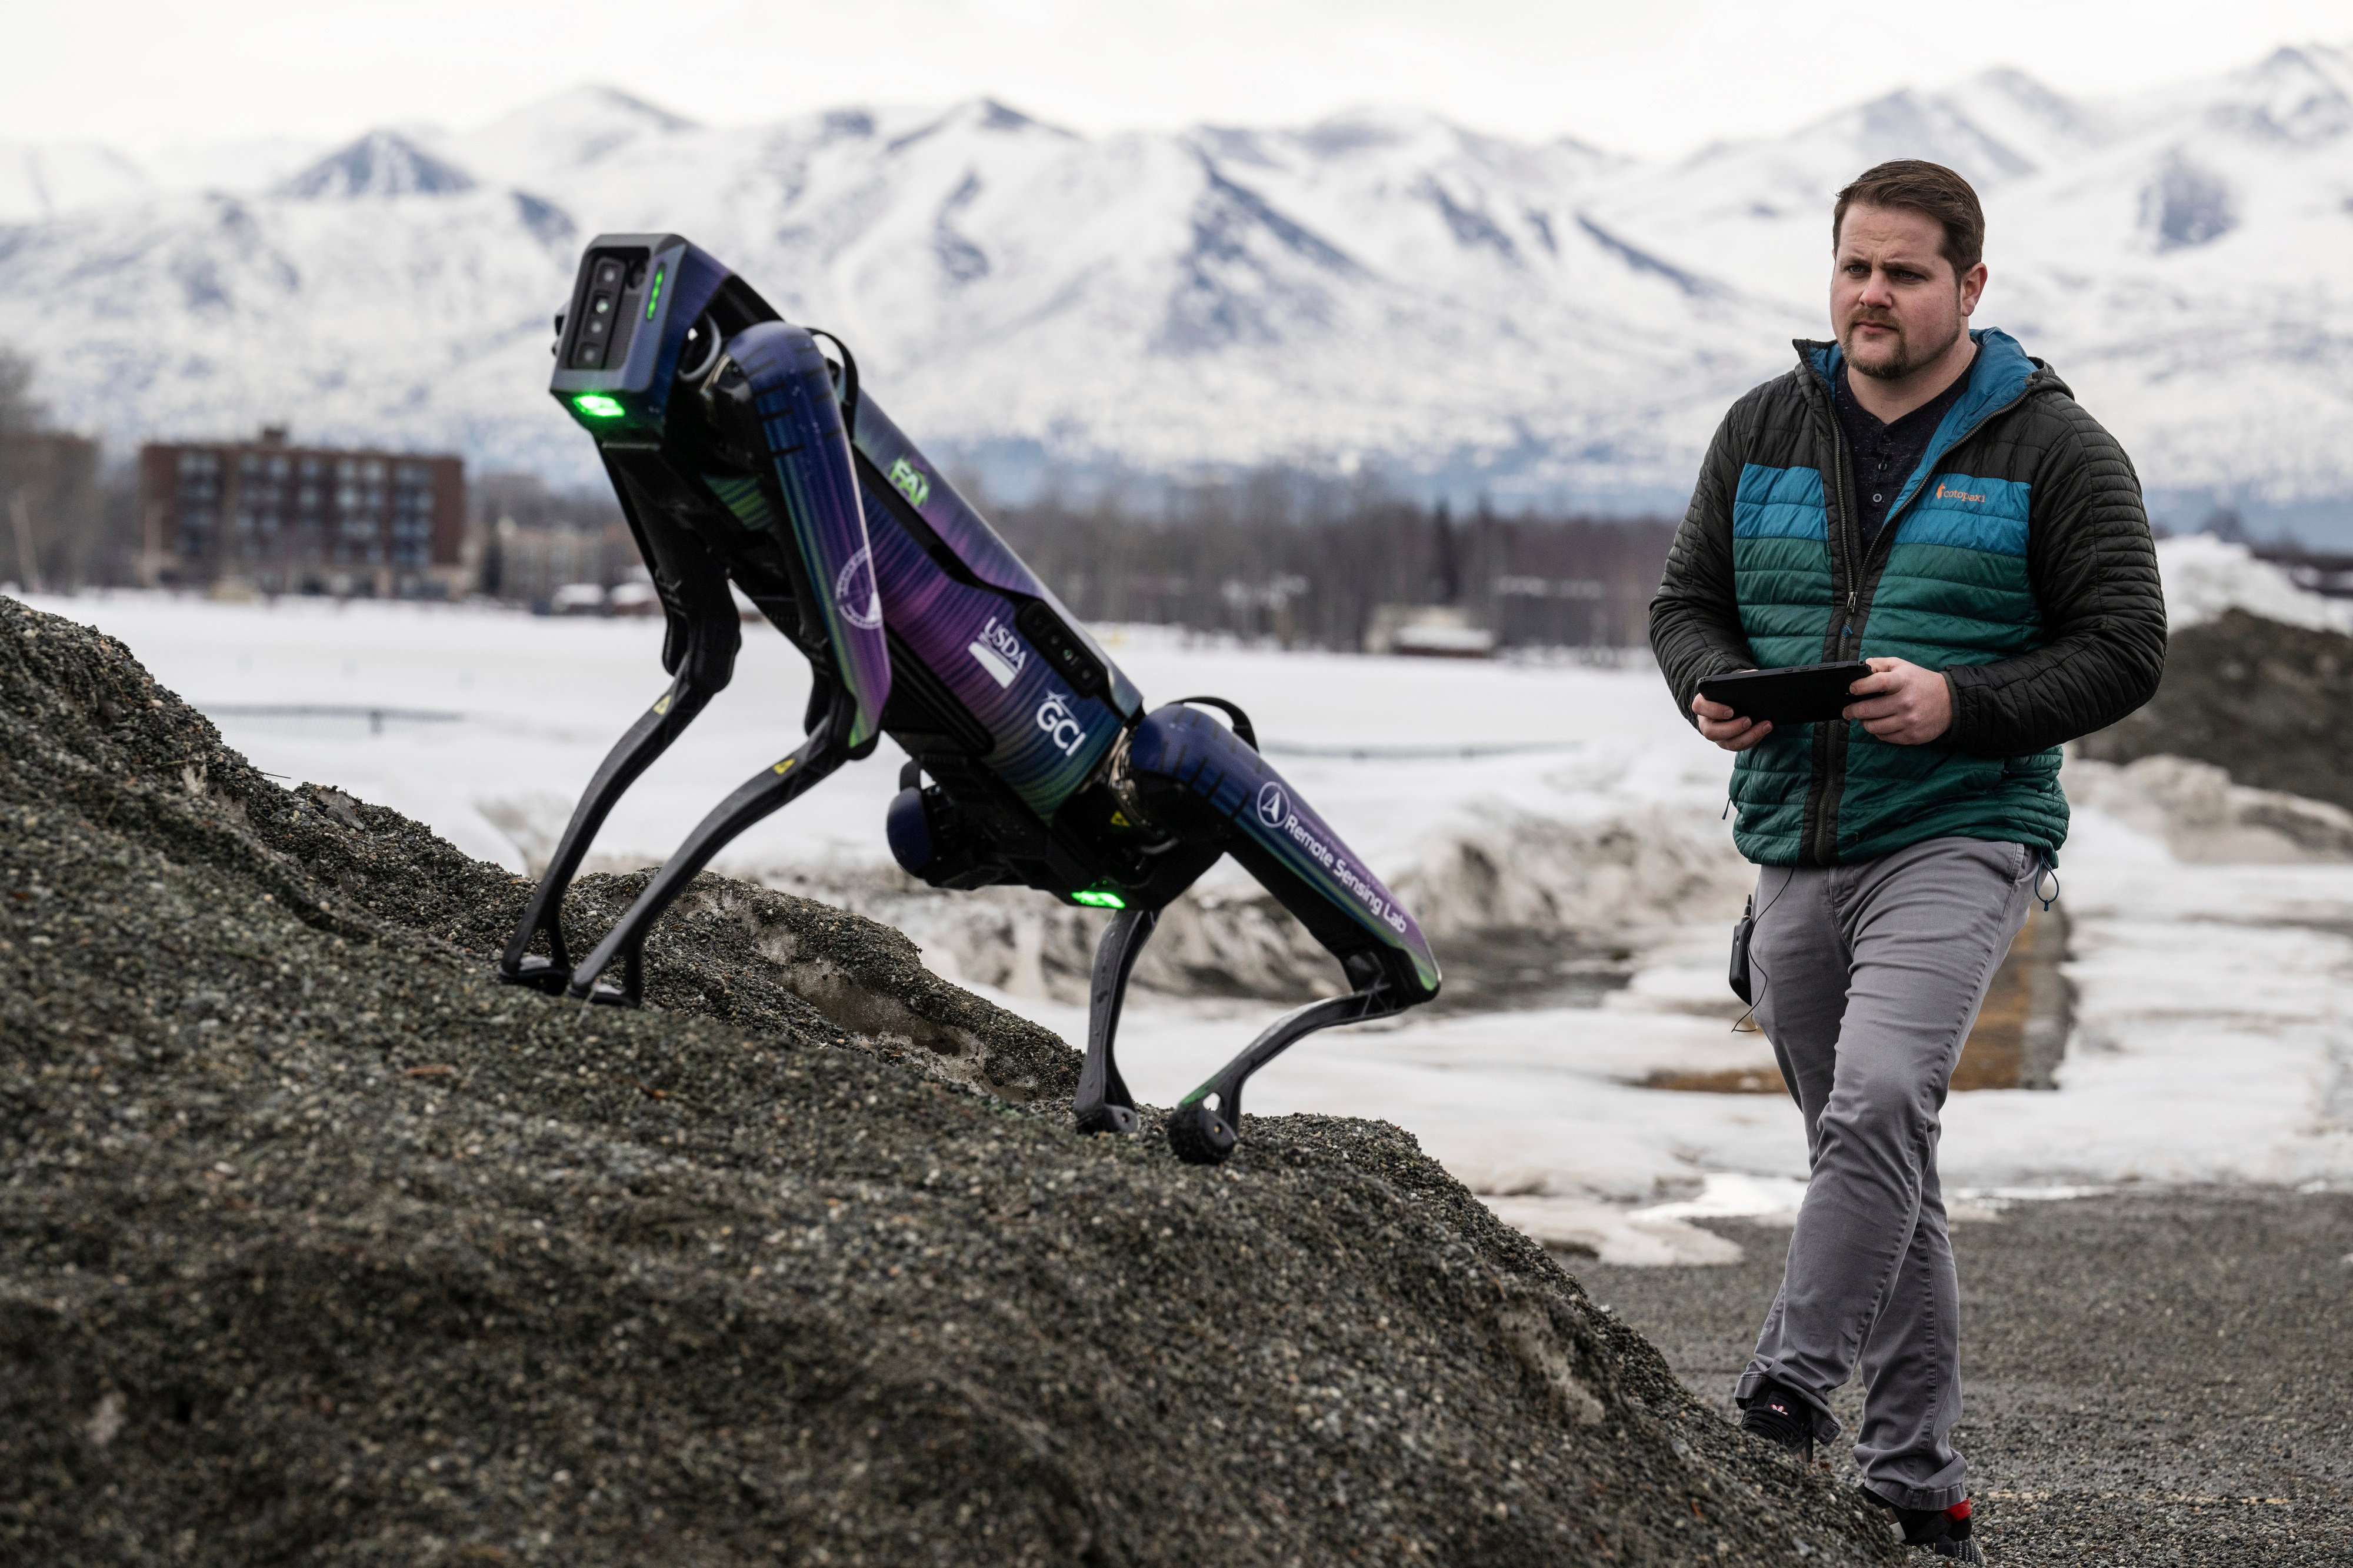 Alaska Department of Transportation programme manager Ryan Marlow demonstrates the agency’s robotic dog in Anchorage, Alaska, on Tuesday. Photo: Anchorage Daily News via AP